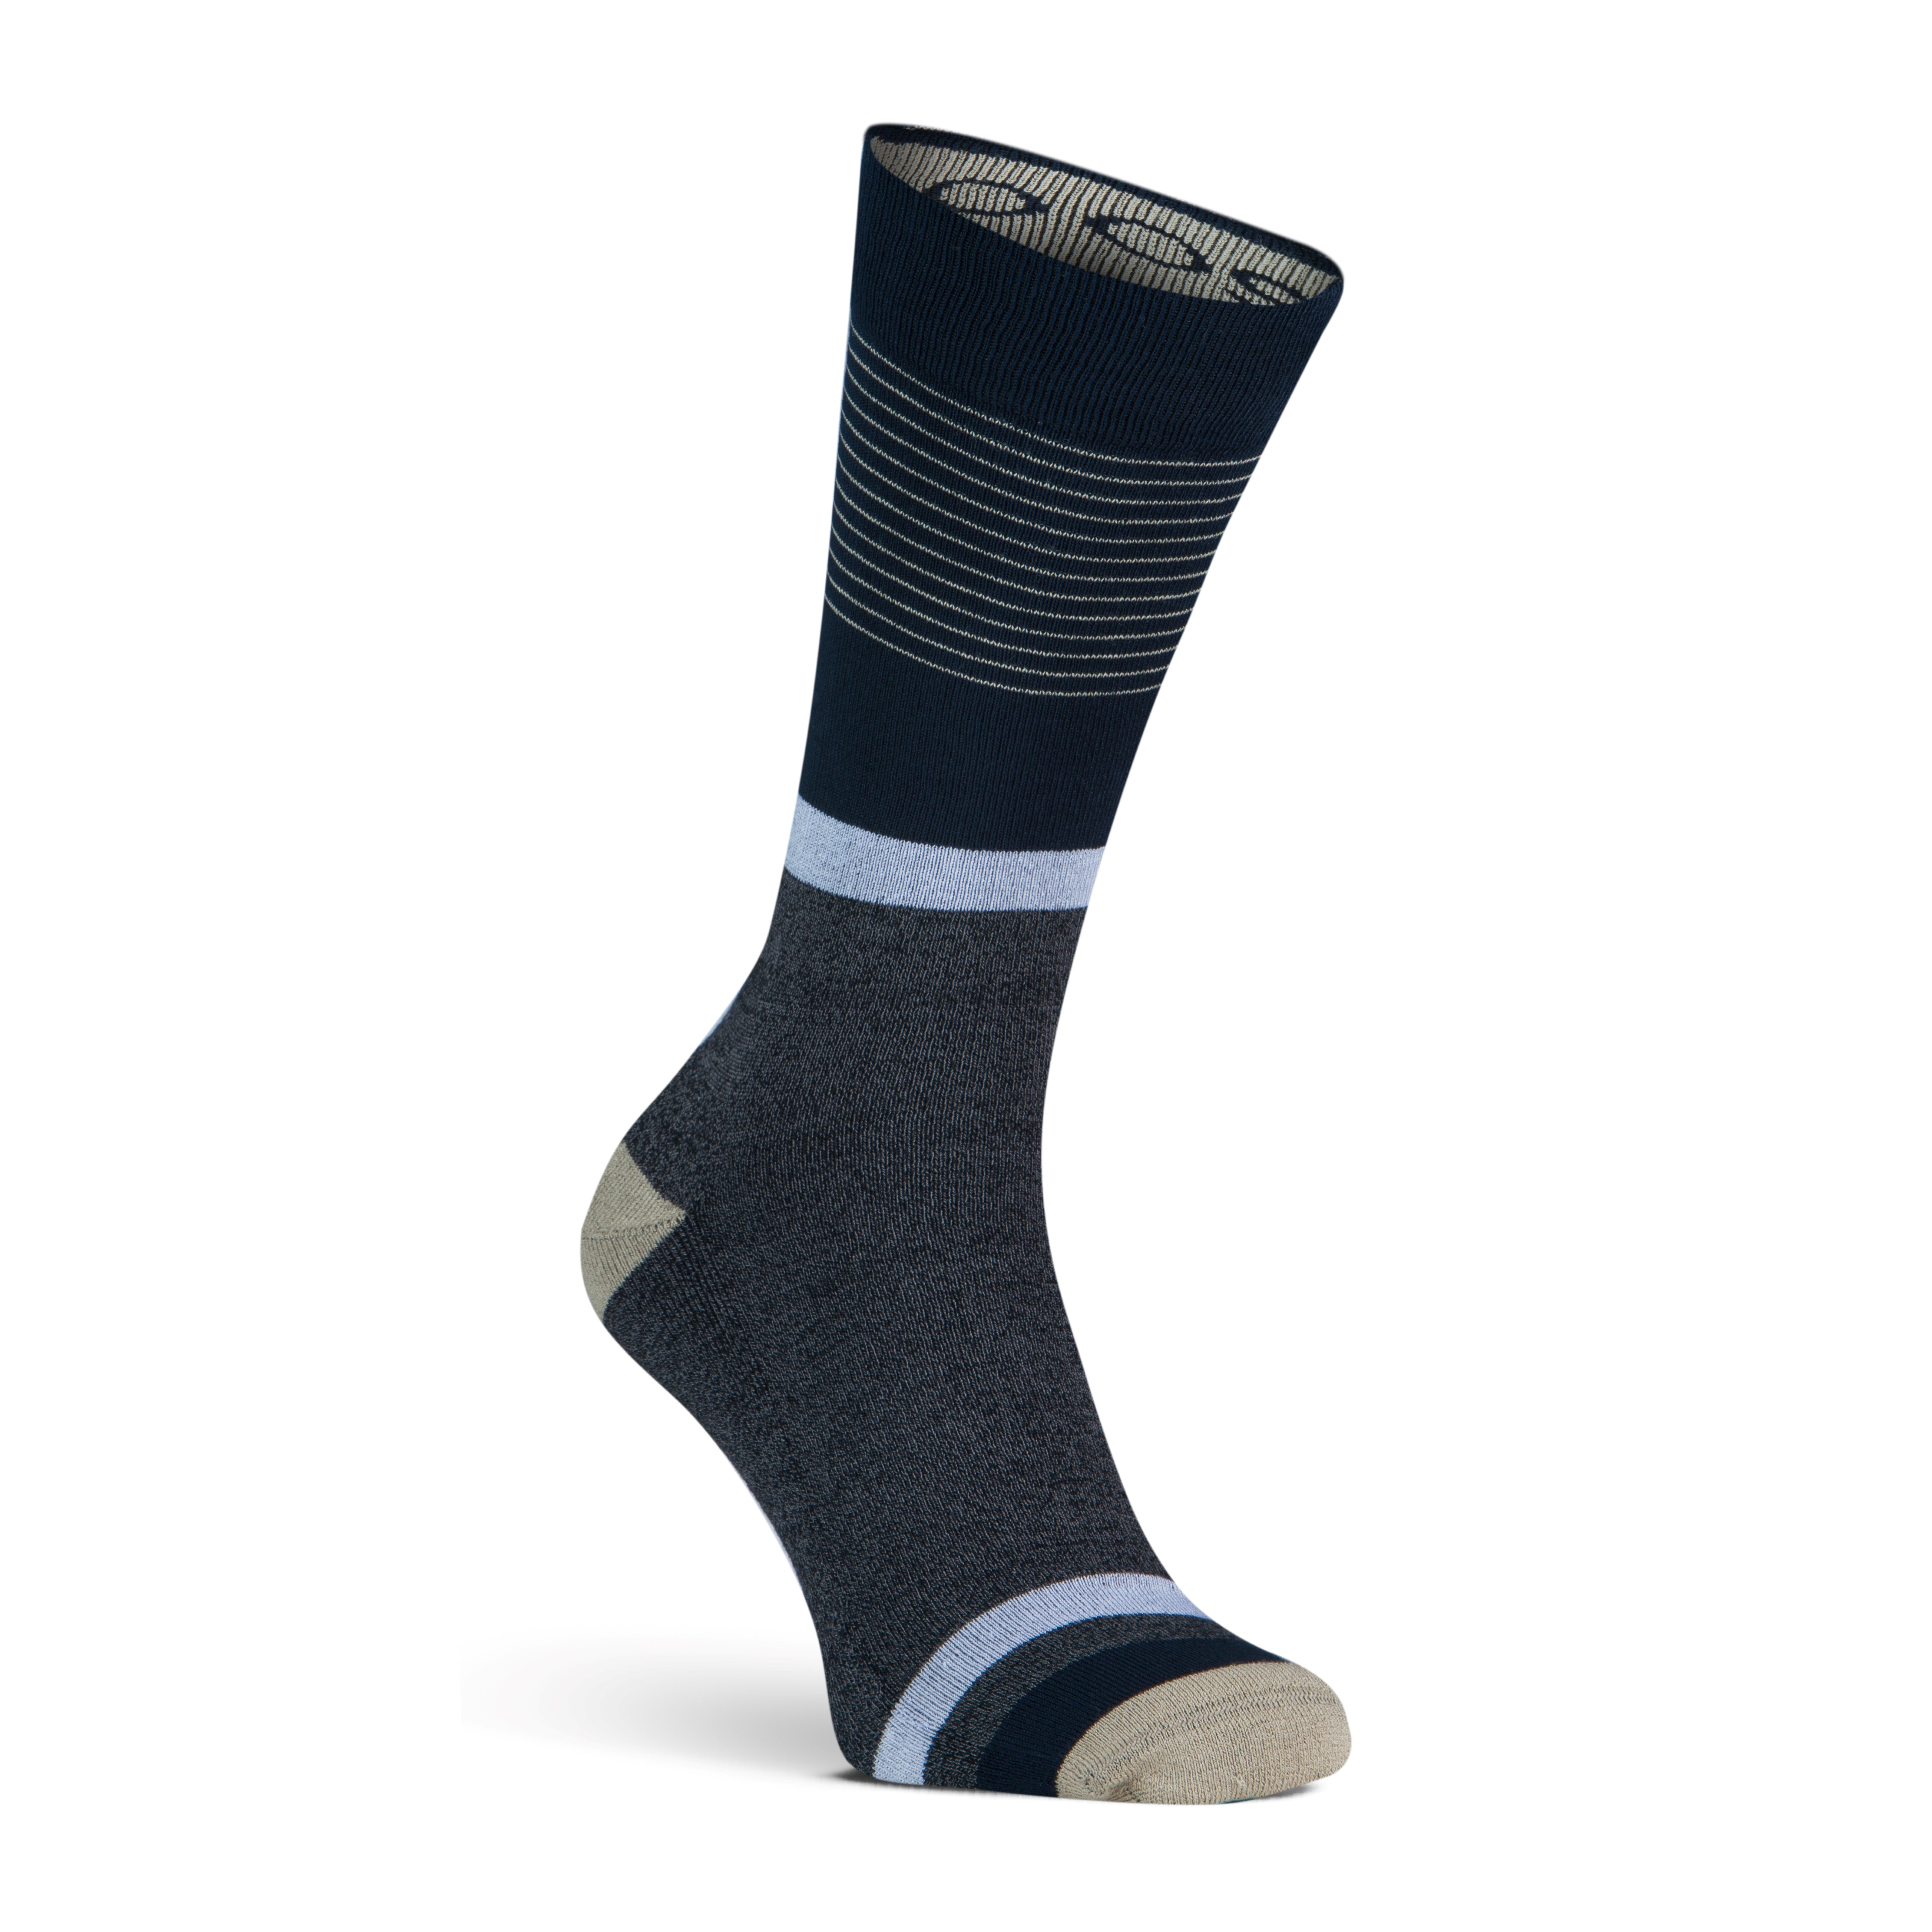 Hong Kong chaussettes pour hommes Anthracite